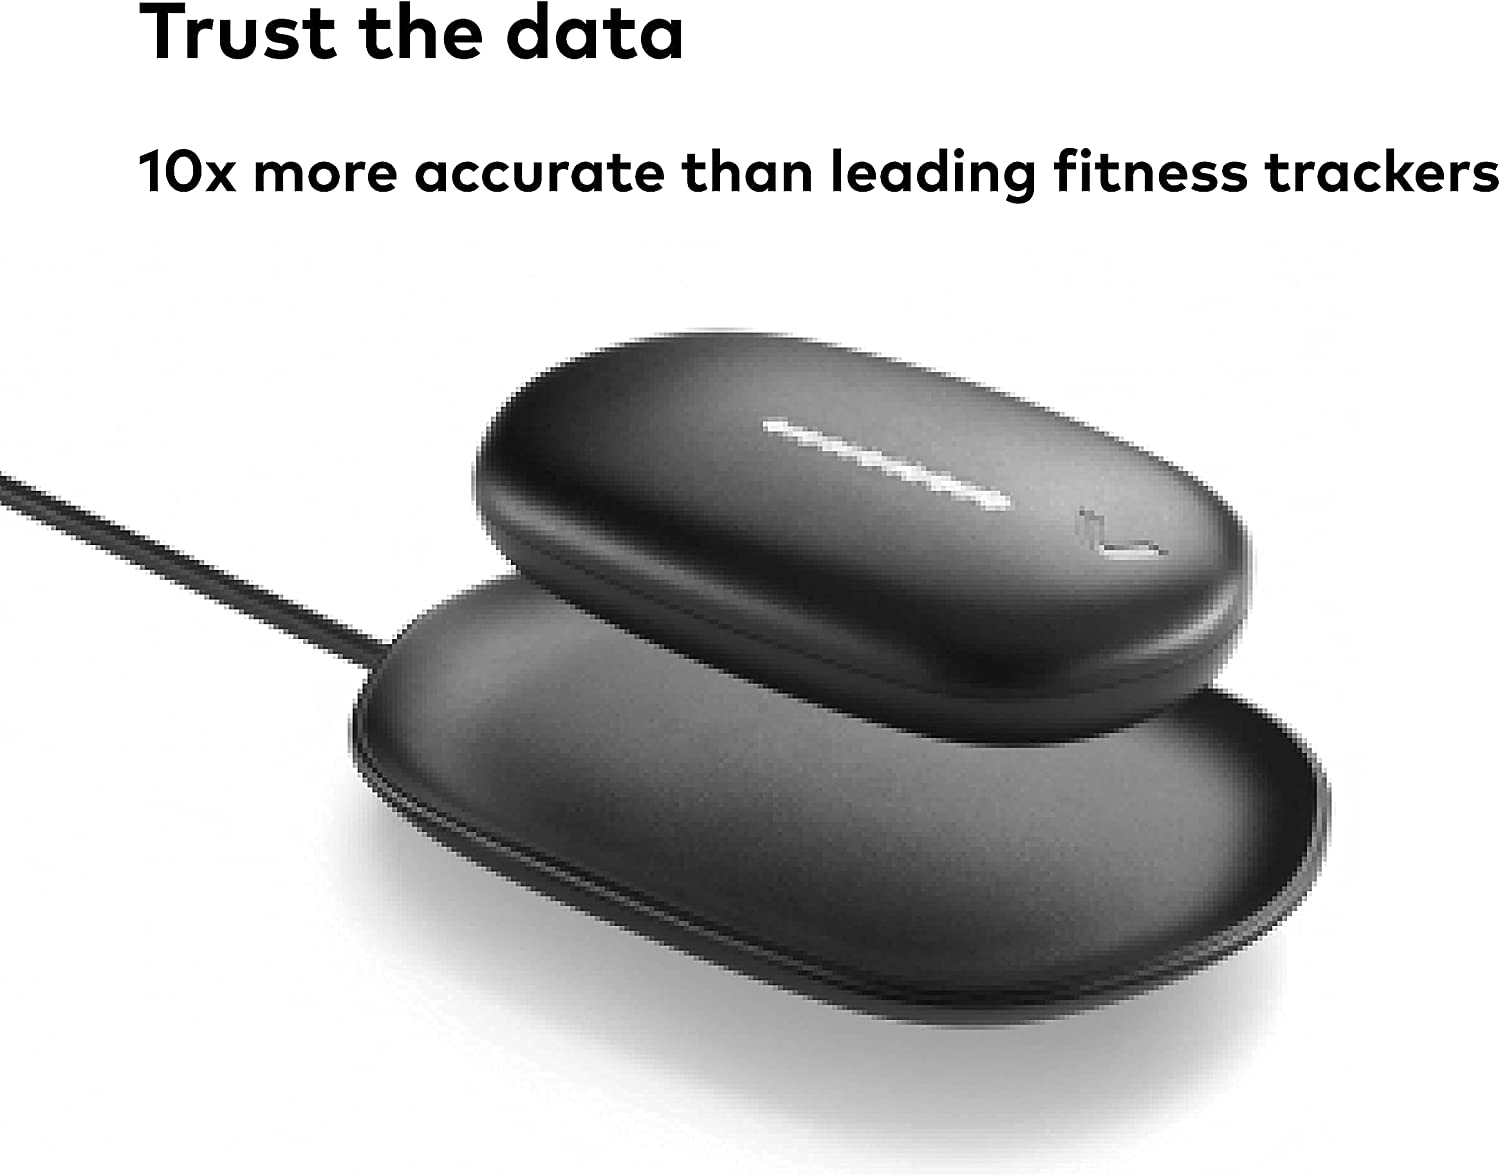 Catapult Launches Prosumer Wearable PLAYR with AI-Enabled SmartCoach